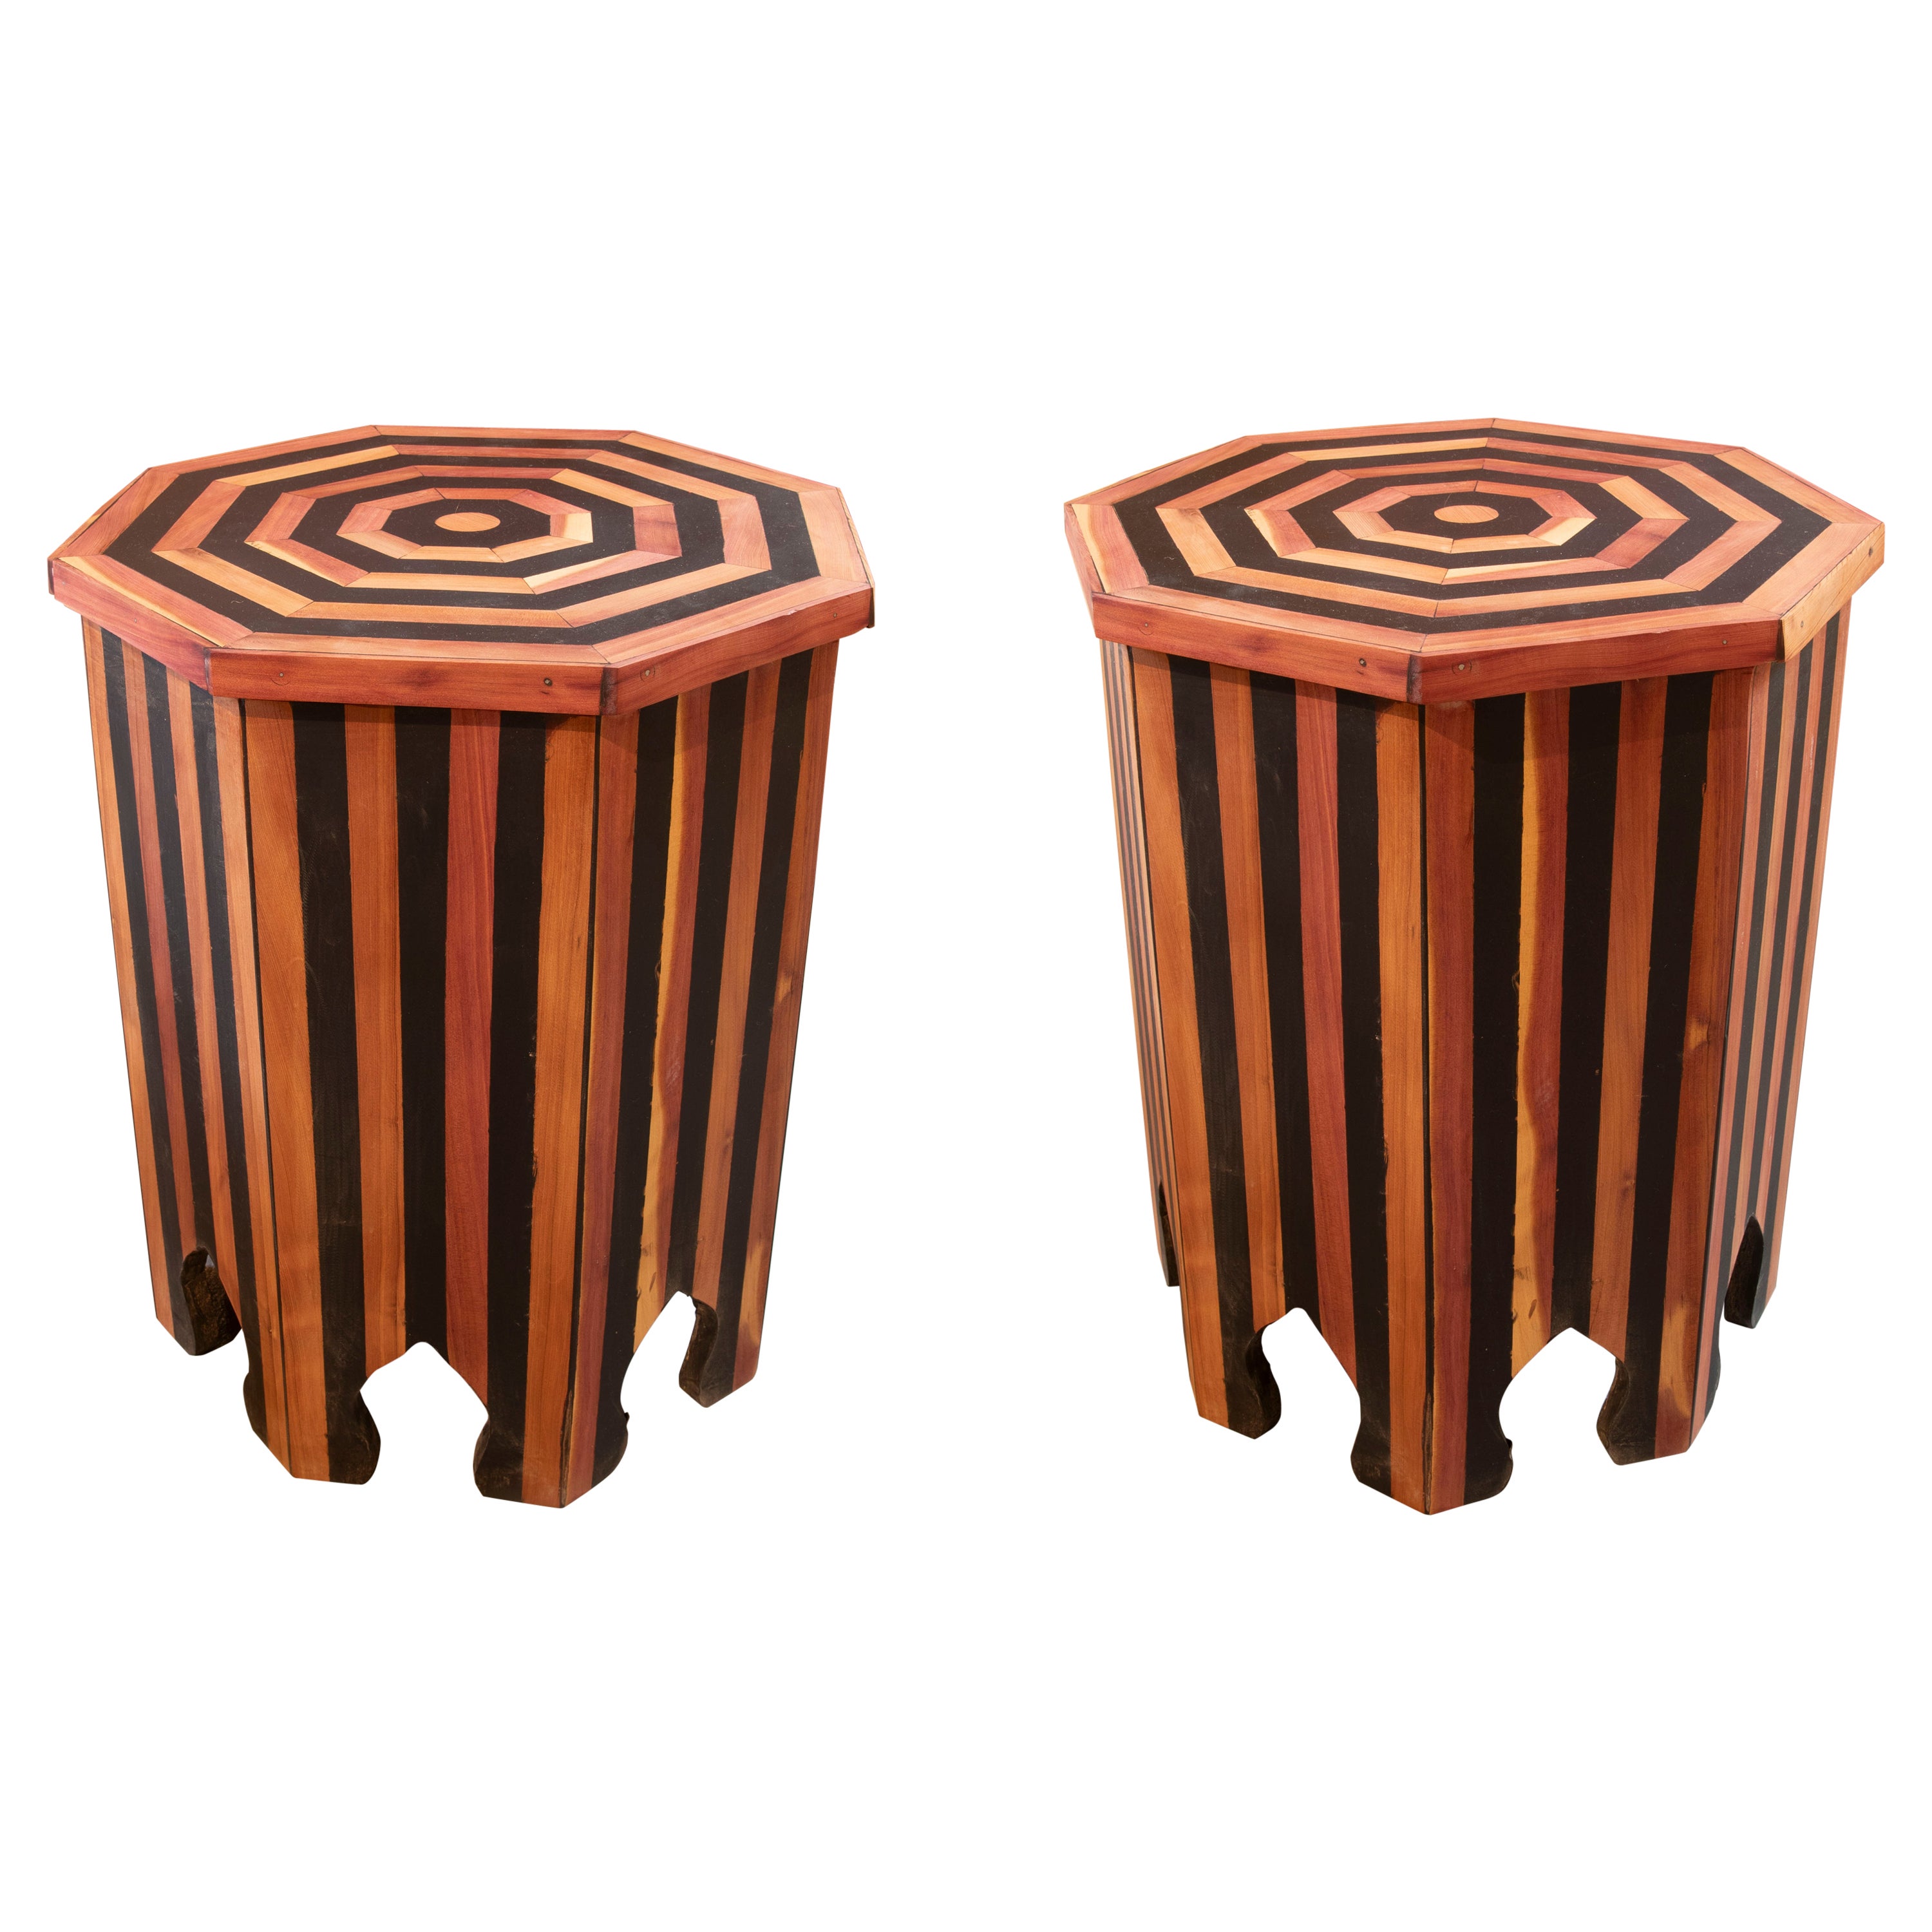 Pair of Octagonal Wooden Side Tables with Striped Decorations